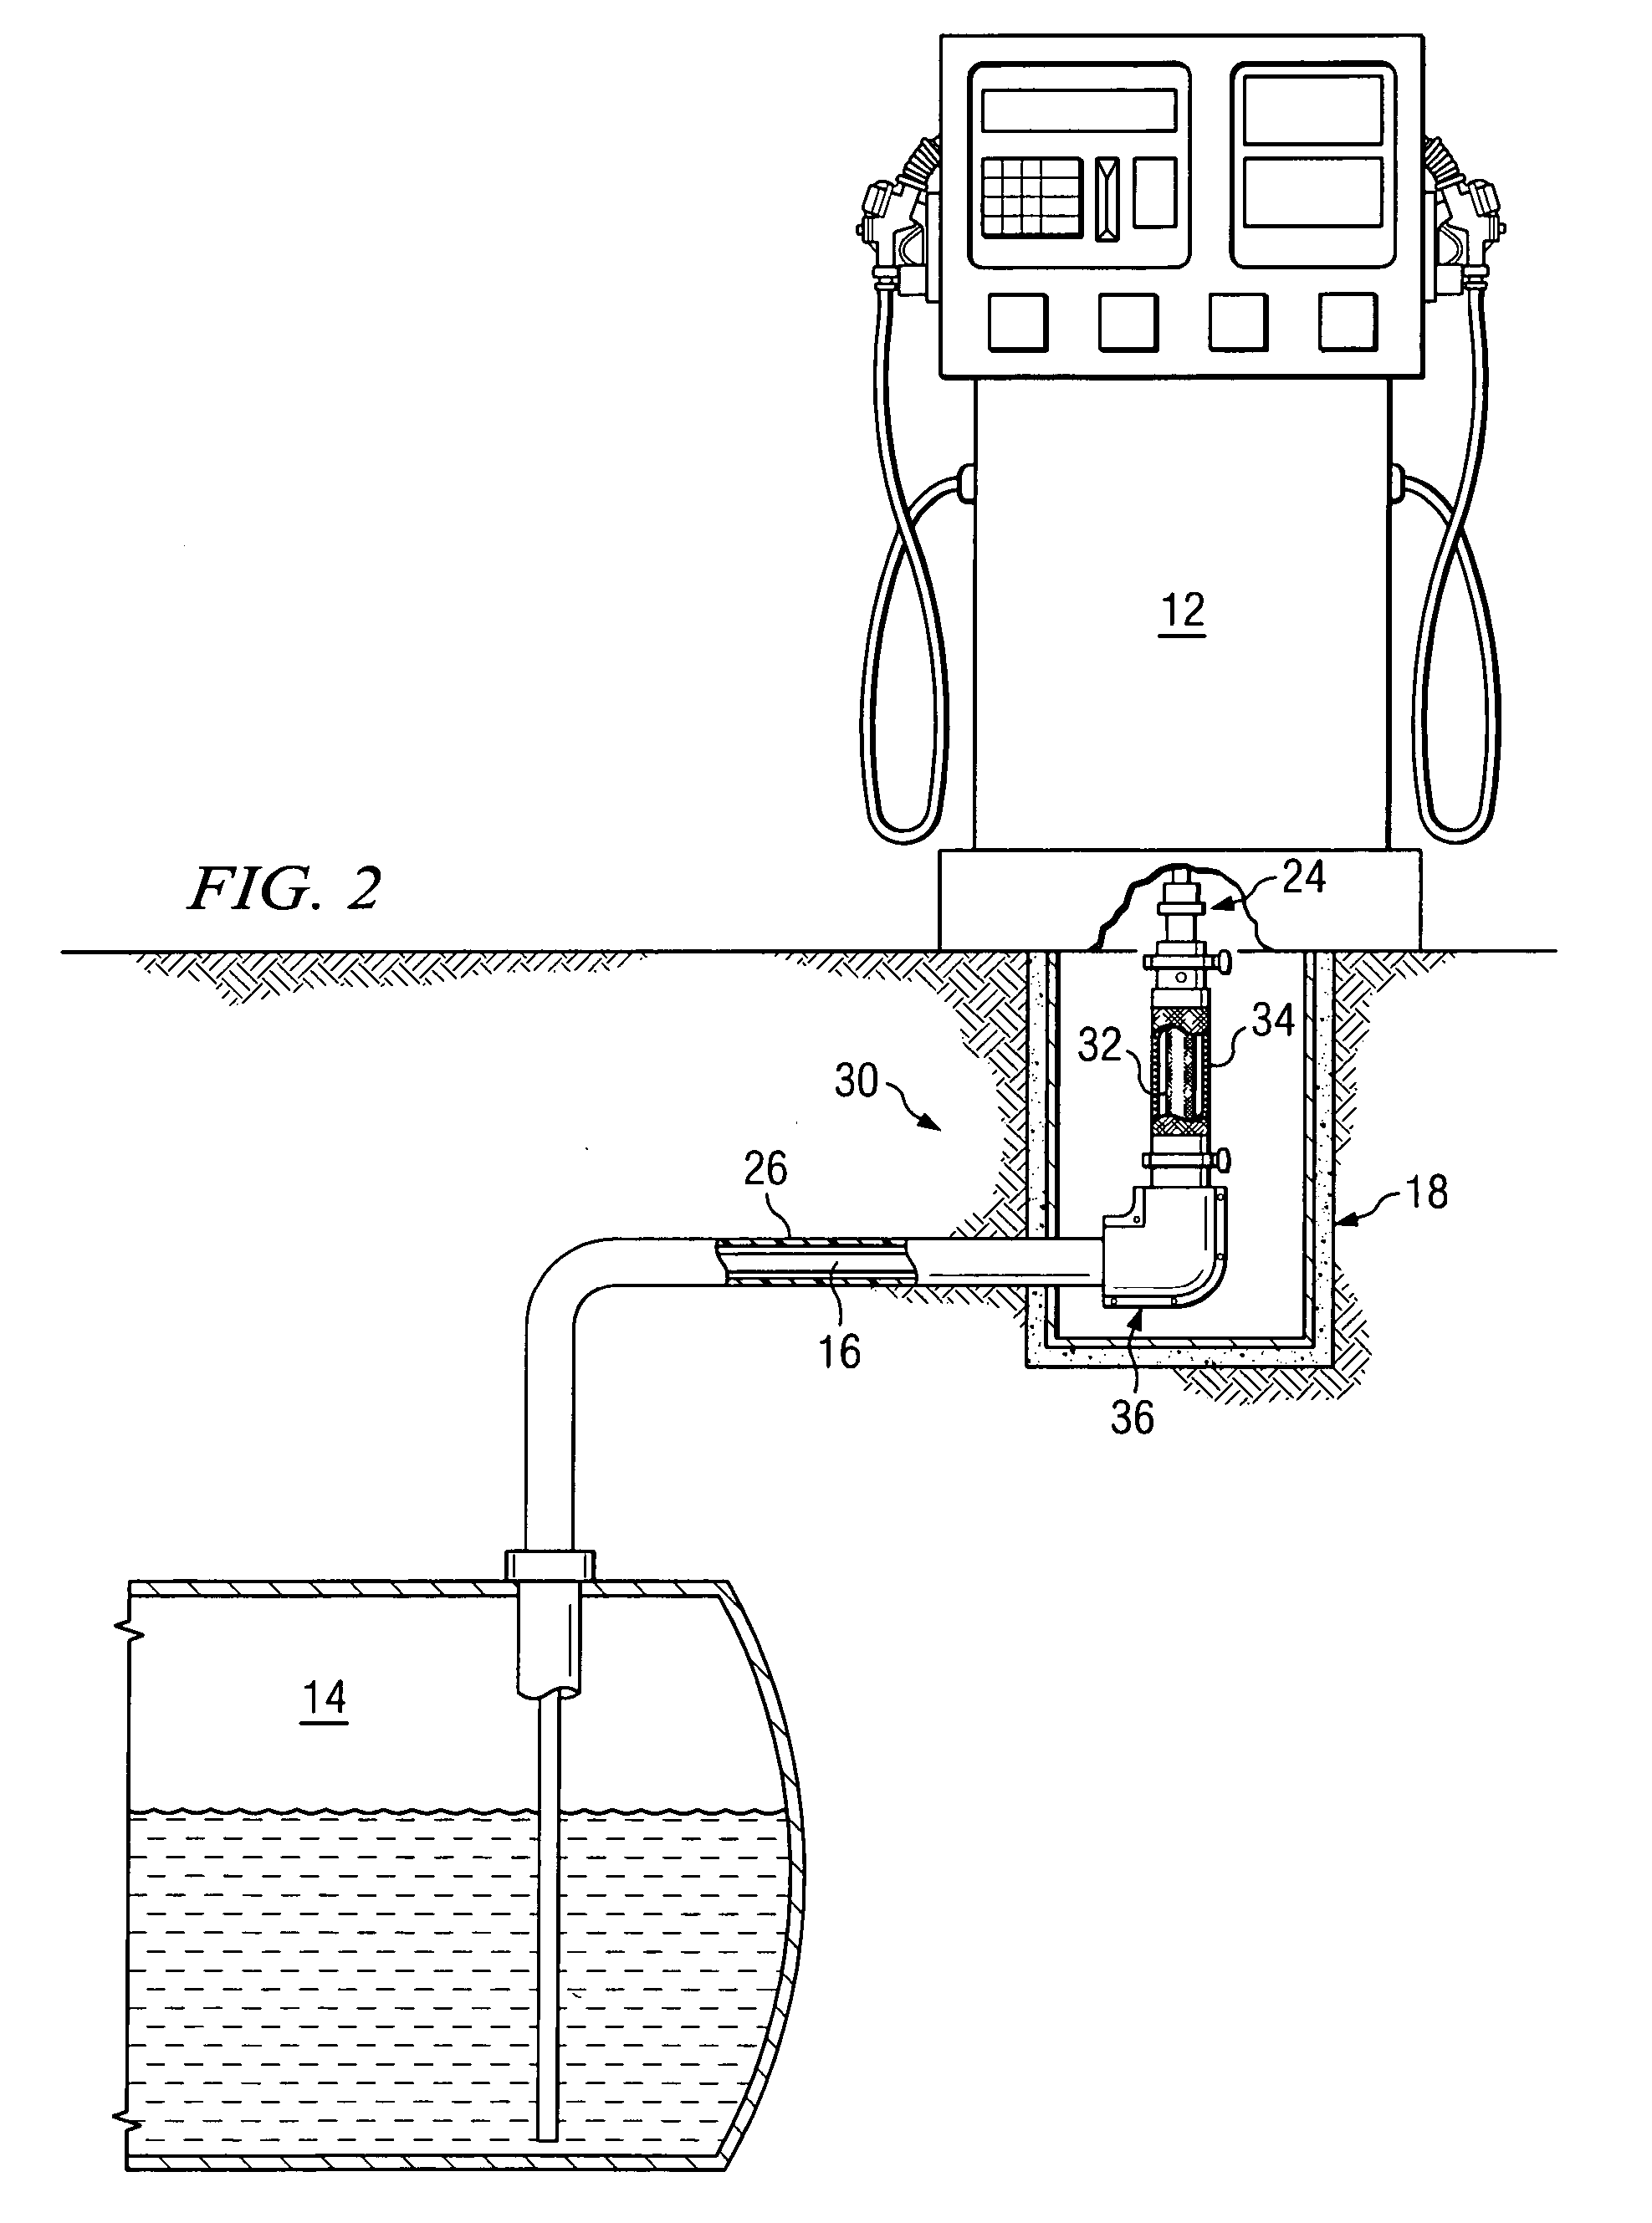 Double-walled flexible dispenser sump connection system